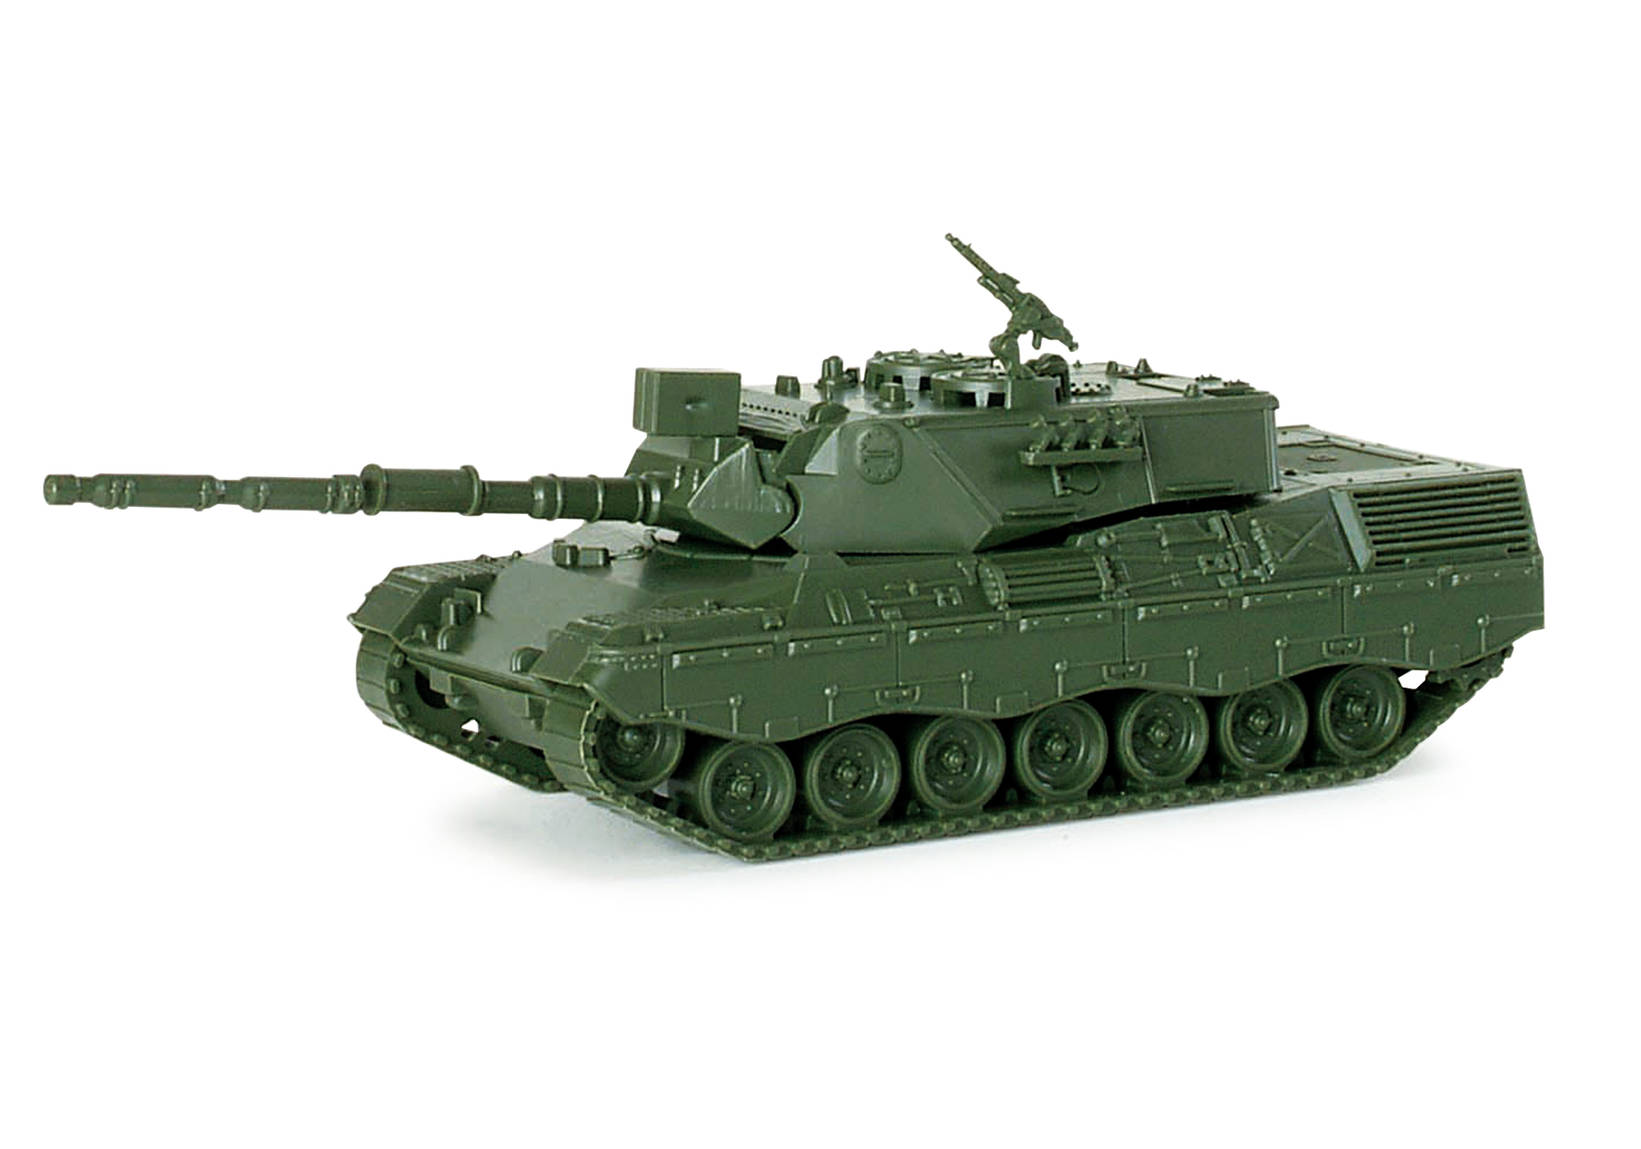 "Leopard" 1A3/A4 (5-6th series) with 105 mm cannon, welded turret.